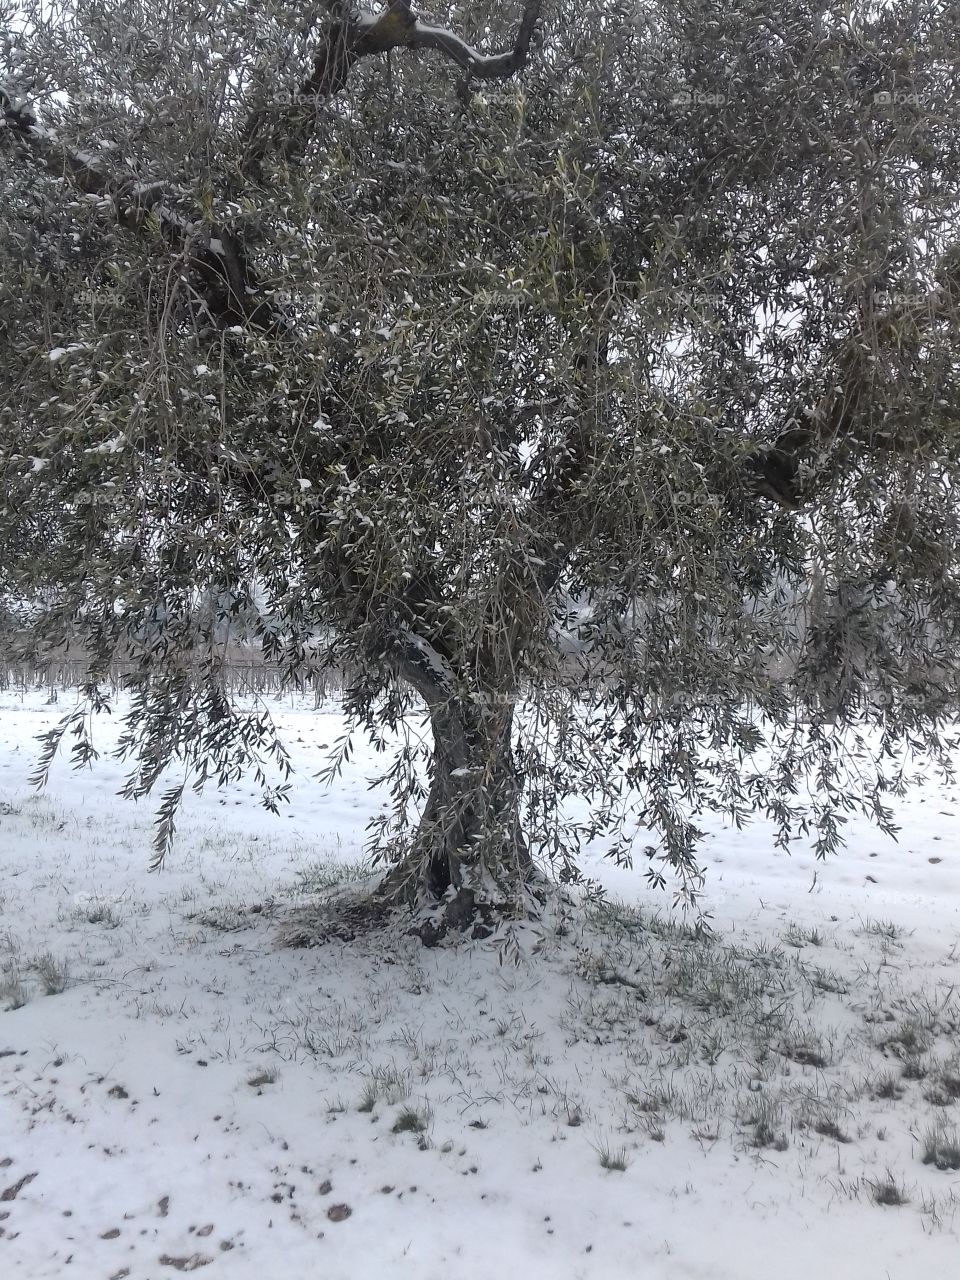 My olive tree under the snow